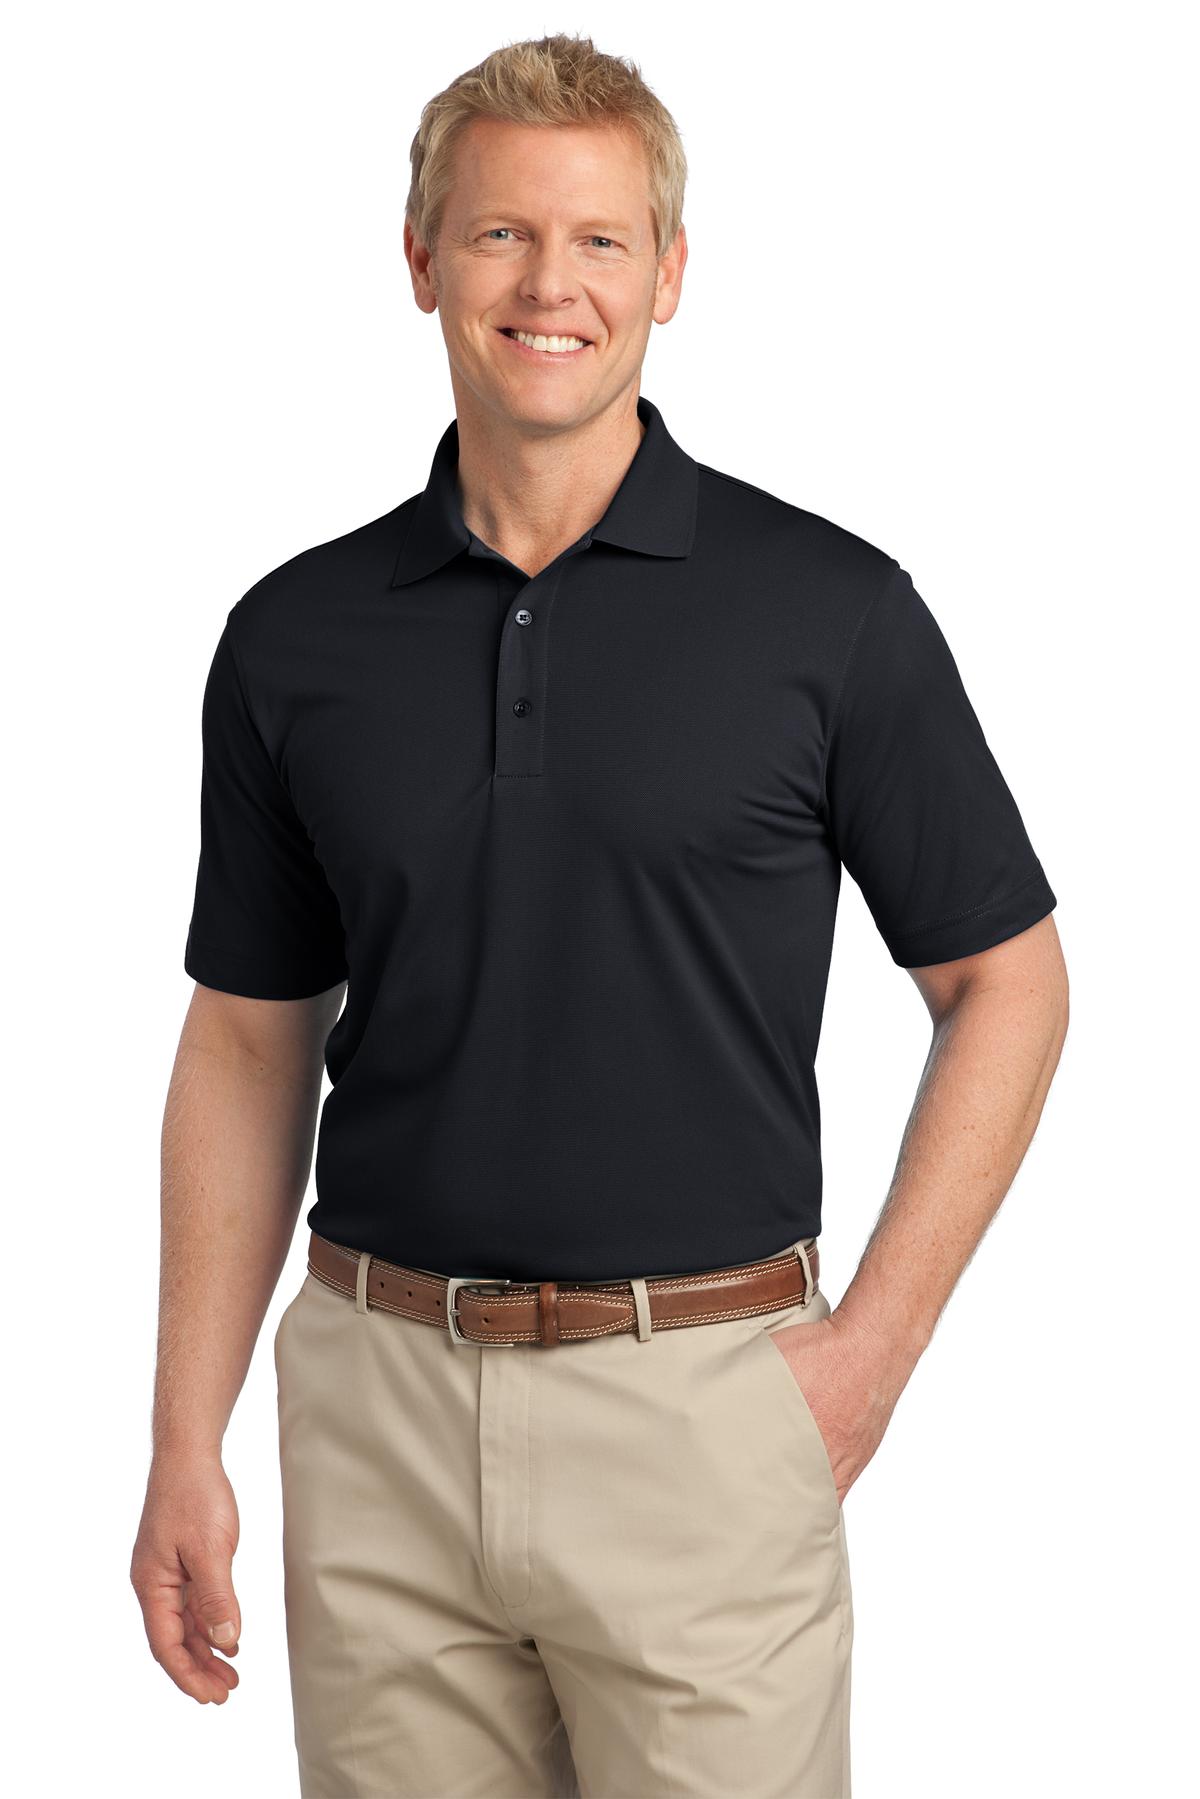 K548 Mens Port Authority Tech Embossed Polo 